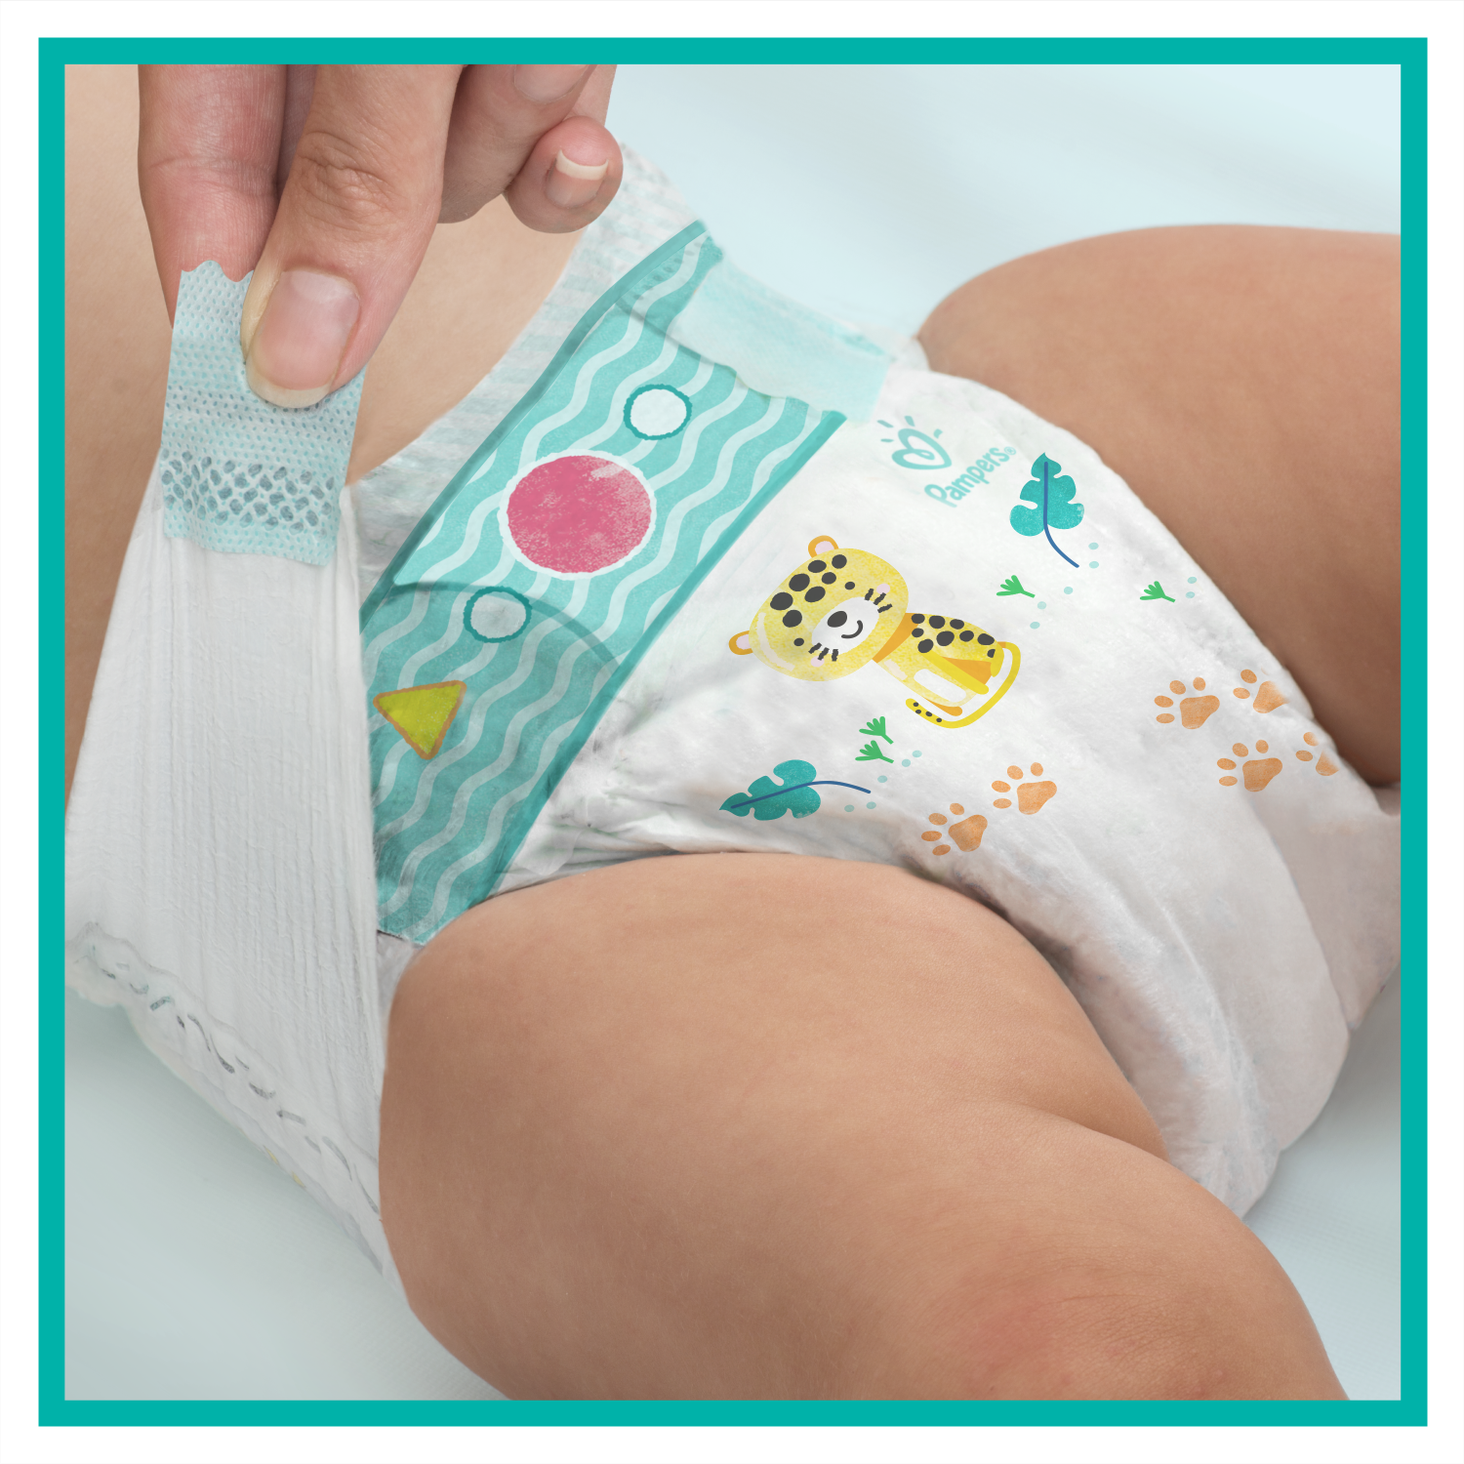 pampers 5 ceneo 150